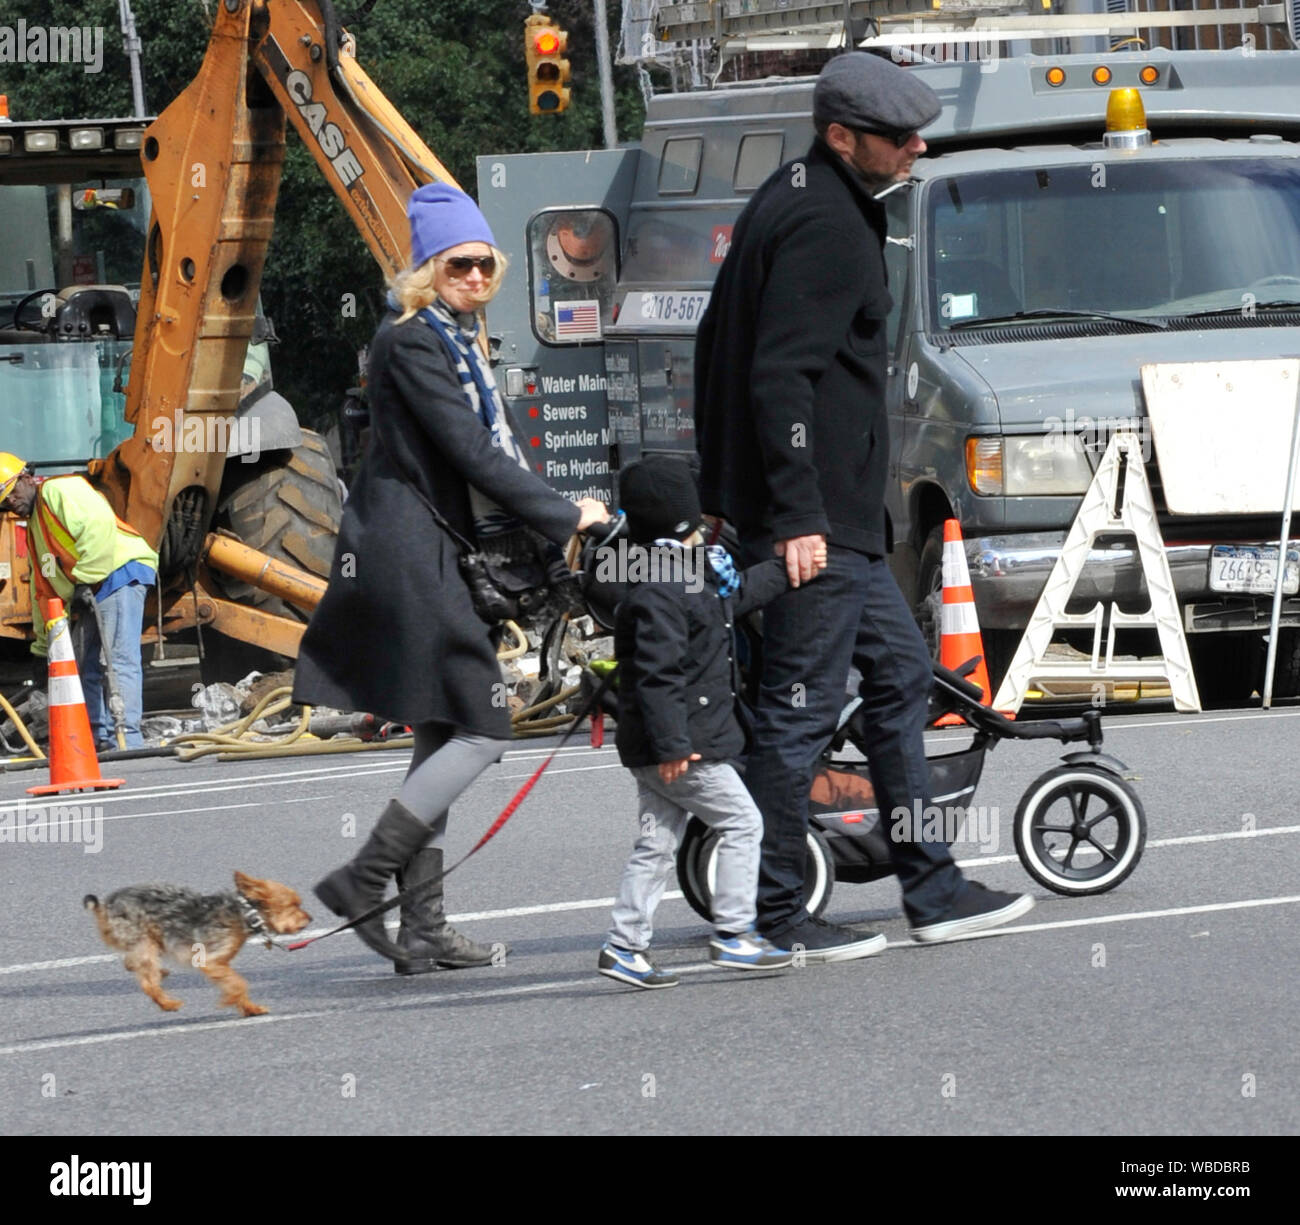 NEW YORK CITY - OCTOBER 16: Actors Naomi Watts and husband Liev Schreiber take a stroll with son Alexander Pete and their dog.  on October 16 2010 in New York City   People:  Naomi Watts Liev Schreiber Alexander Pete Stock Photo